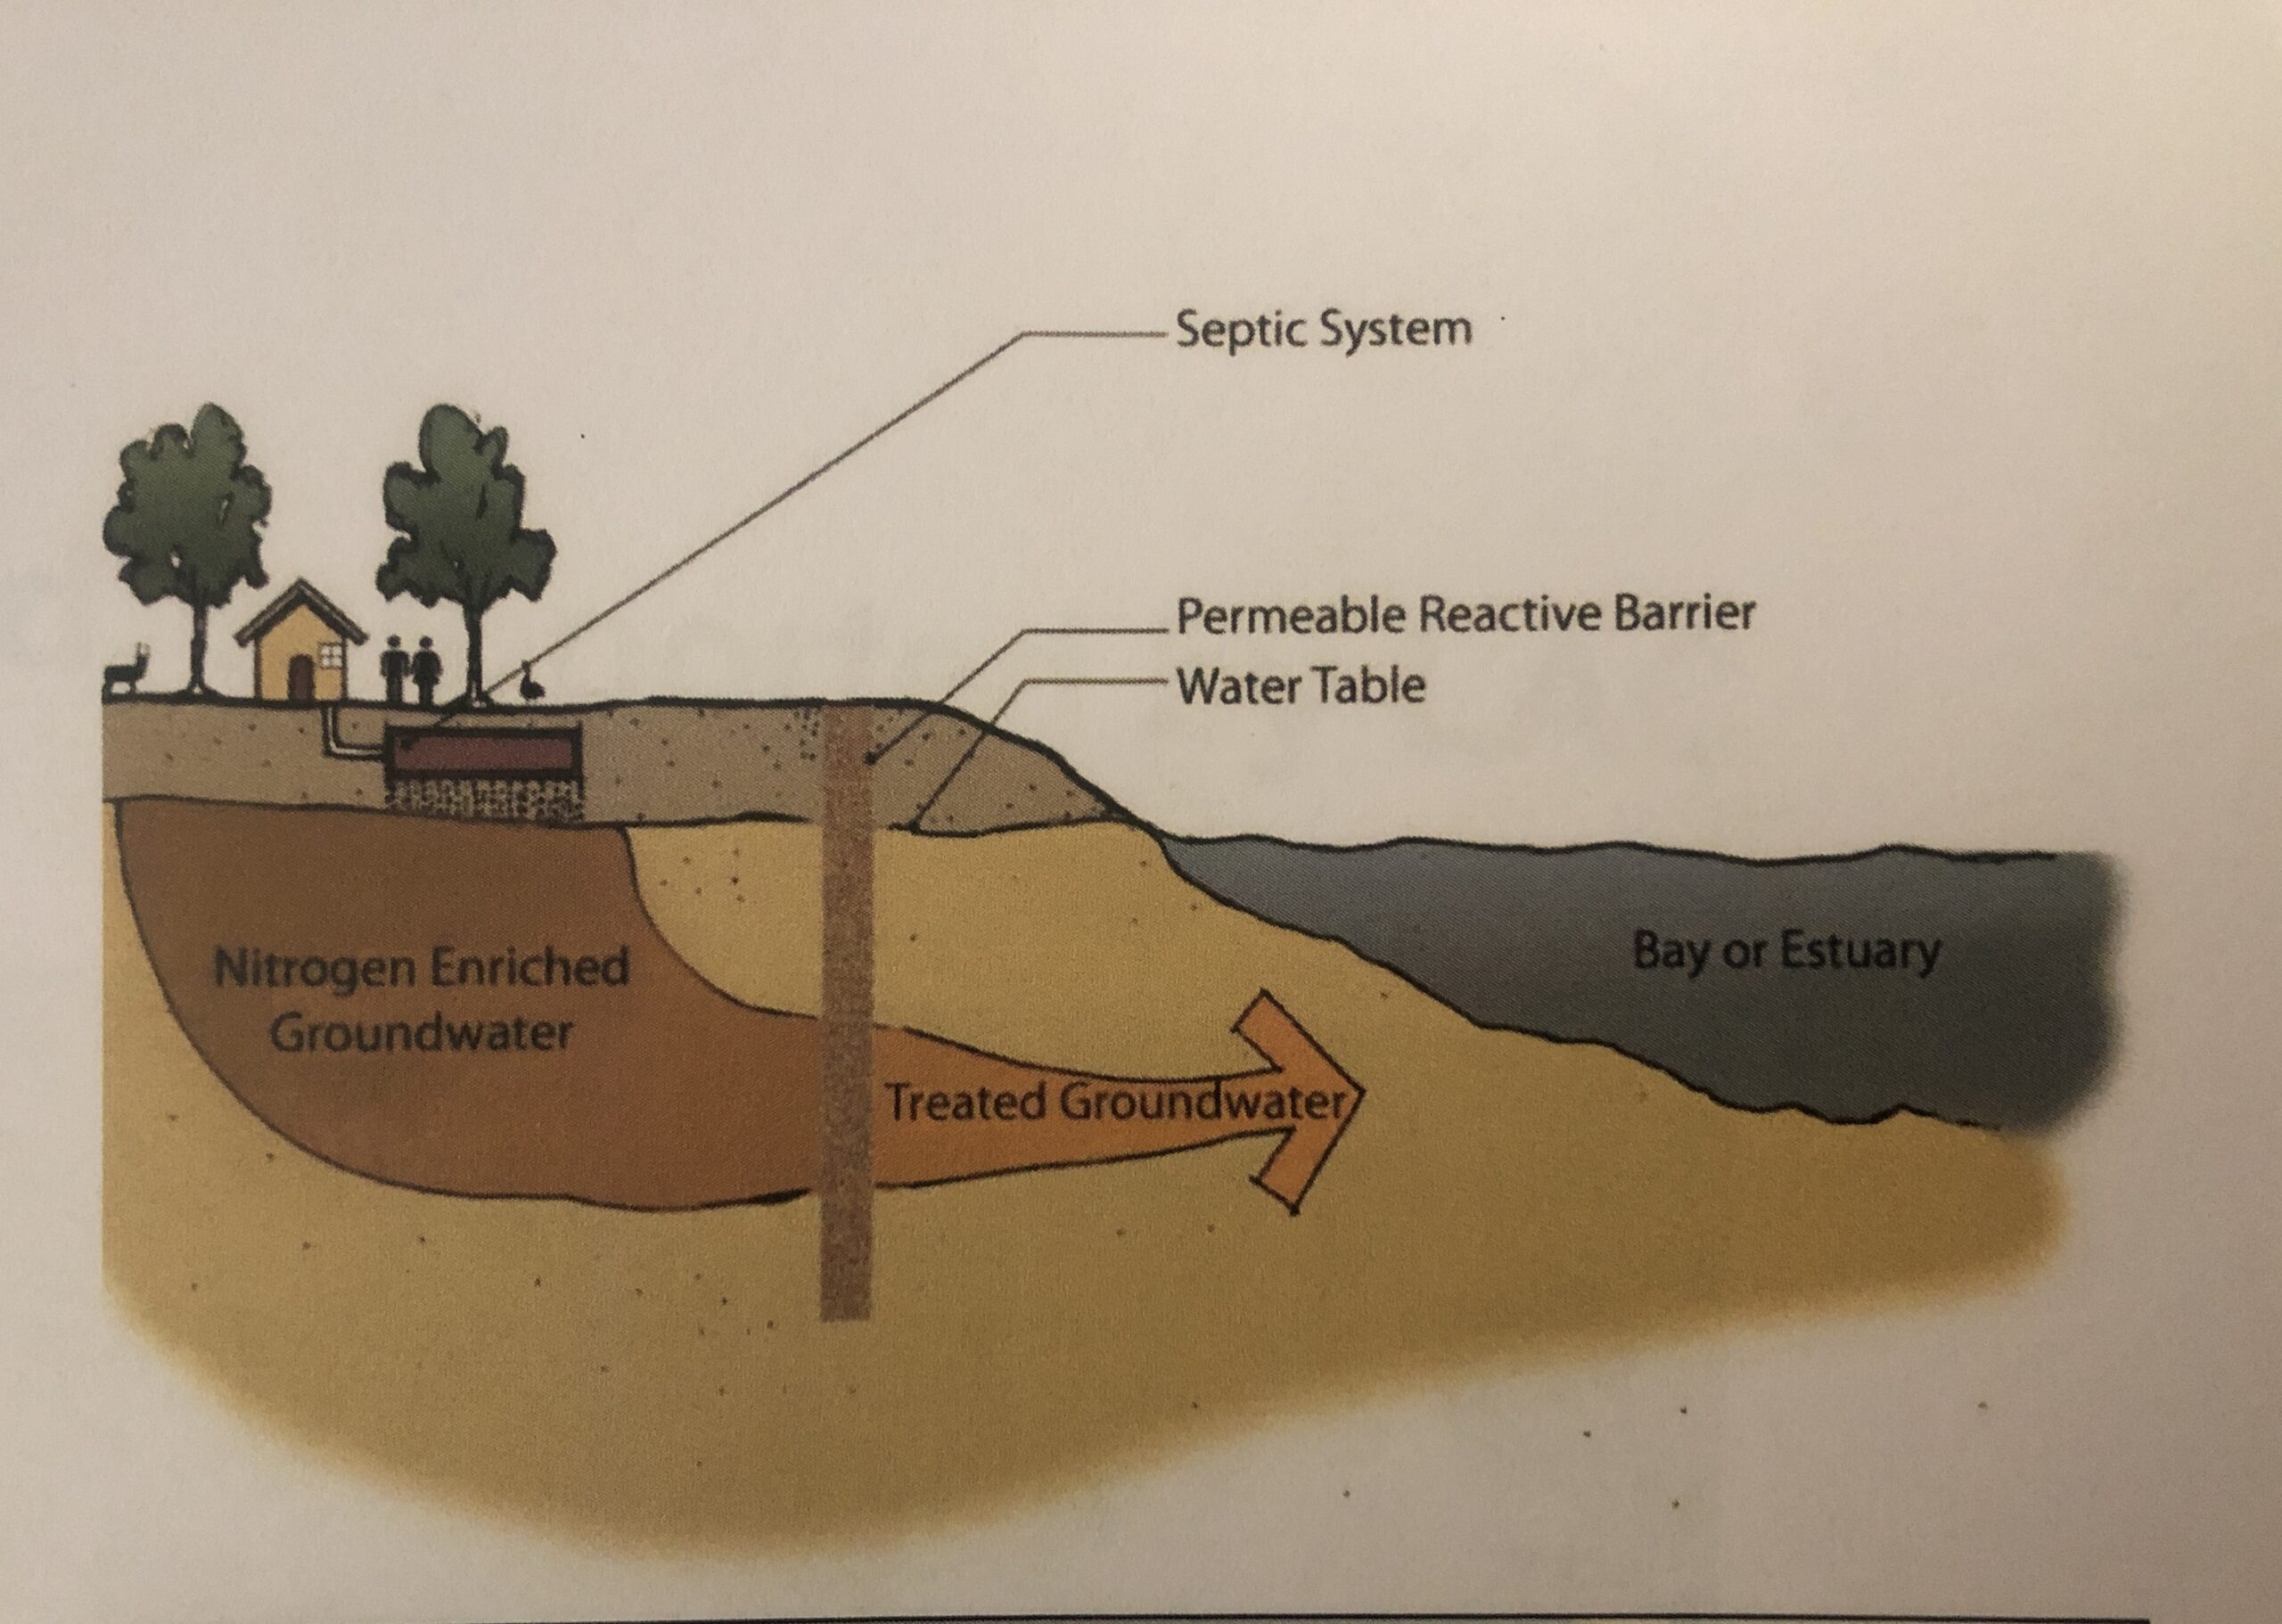 This graphic depicts how a permeable reactive barrier works to keep harmful pollutants from entering the water.